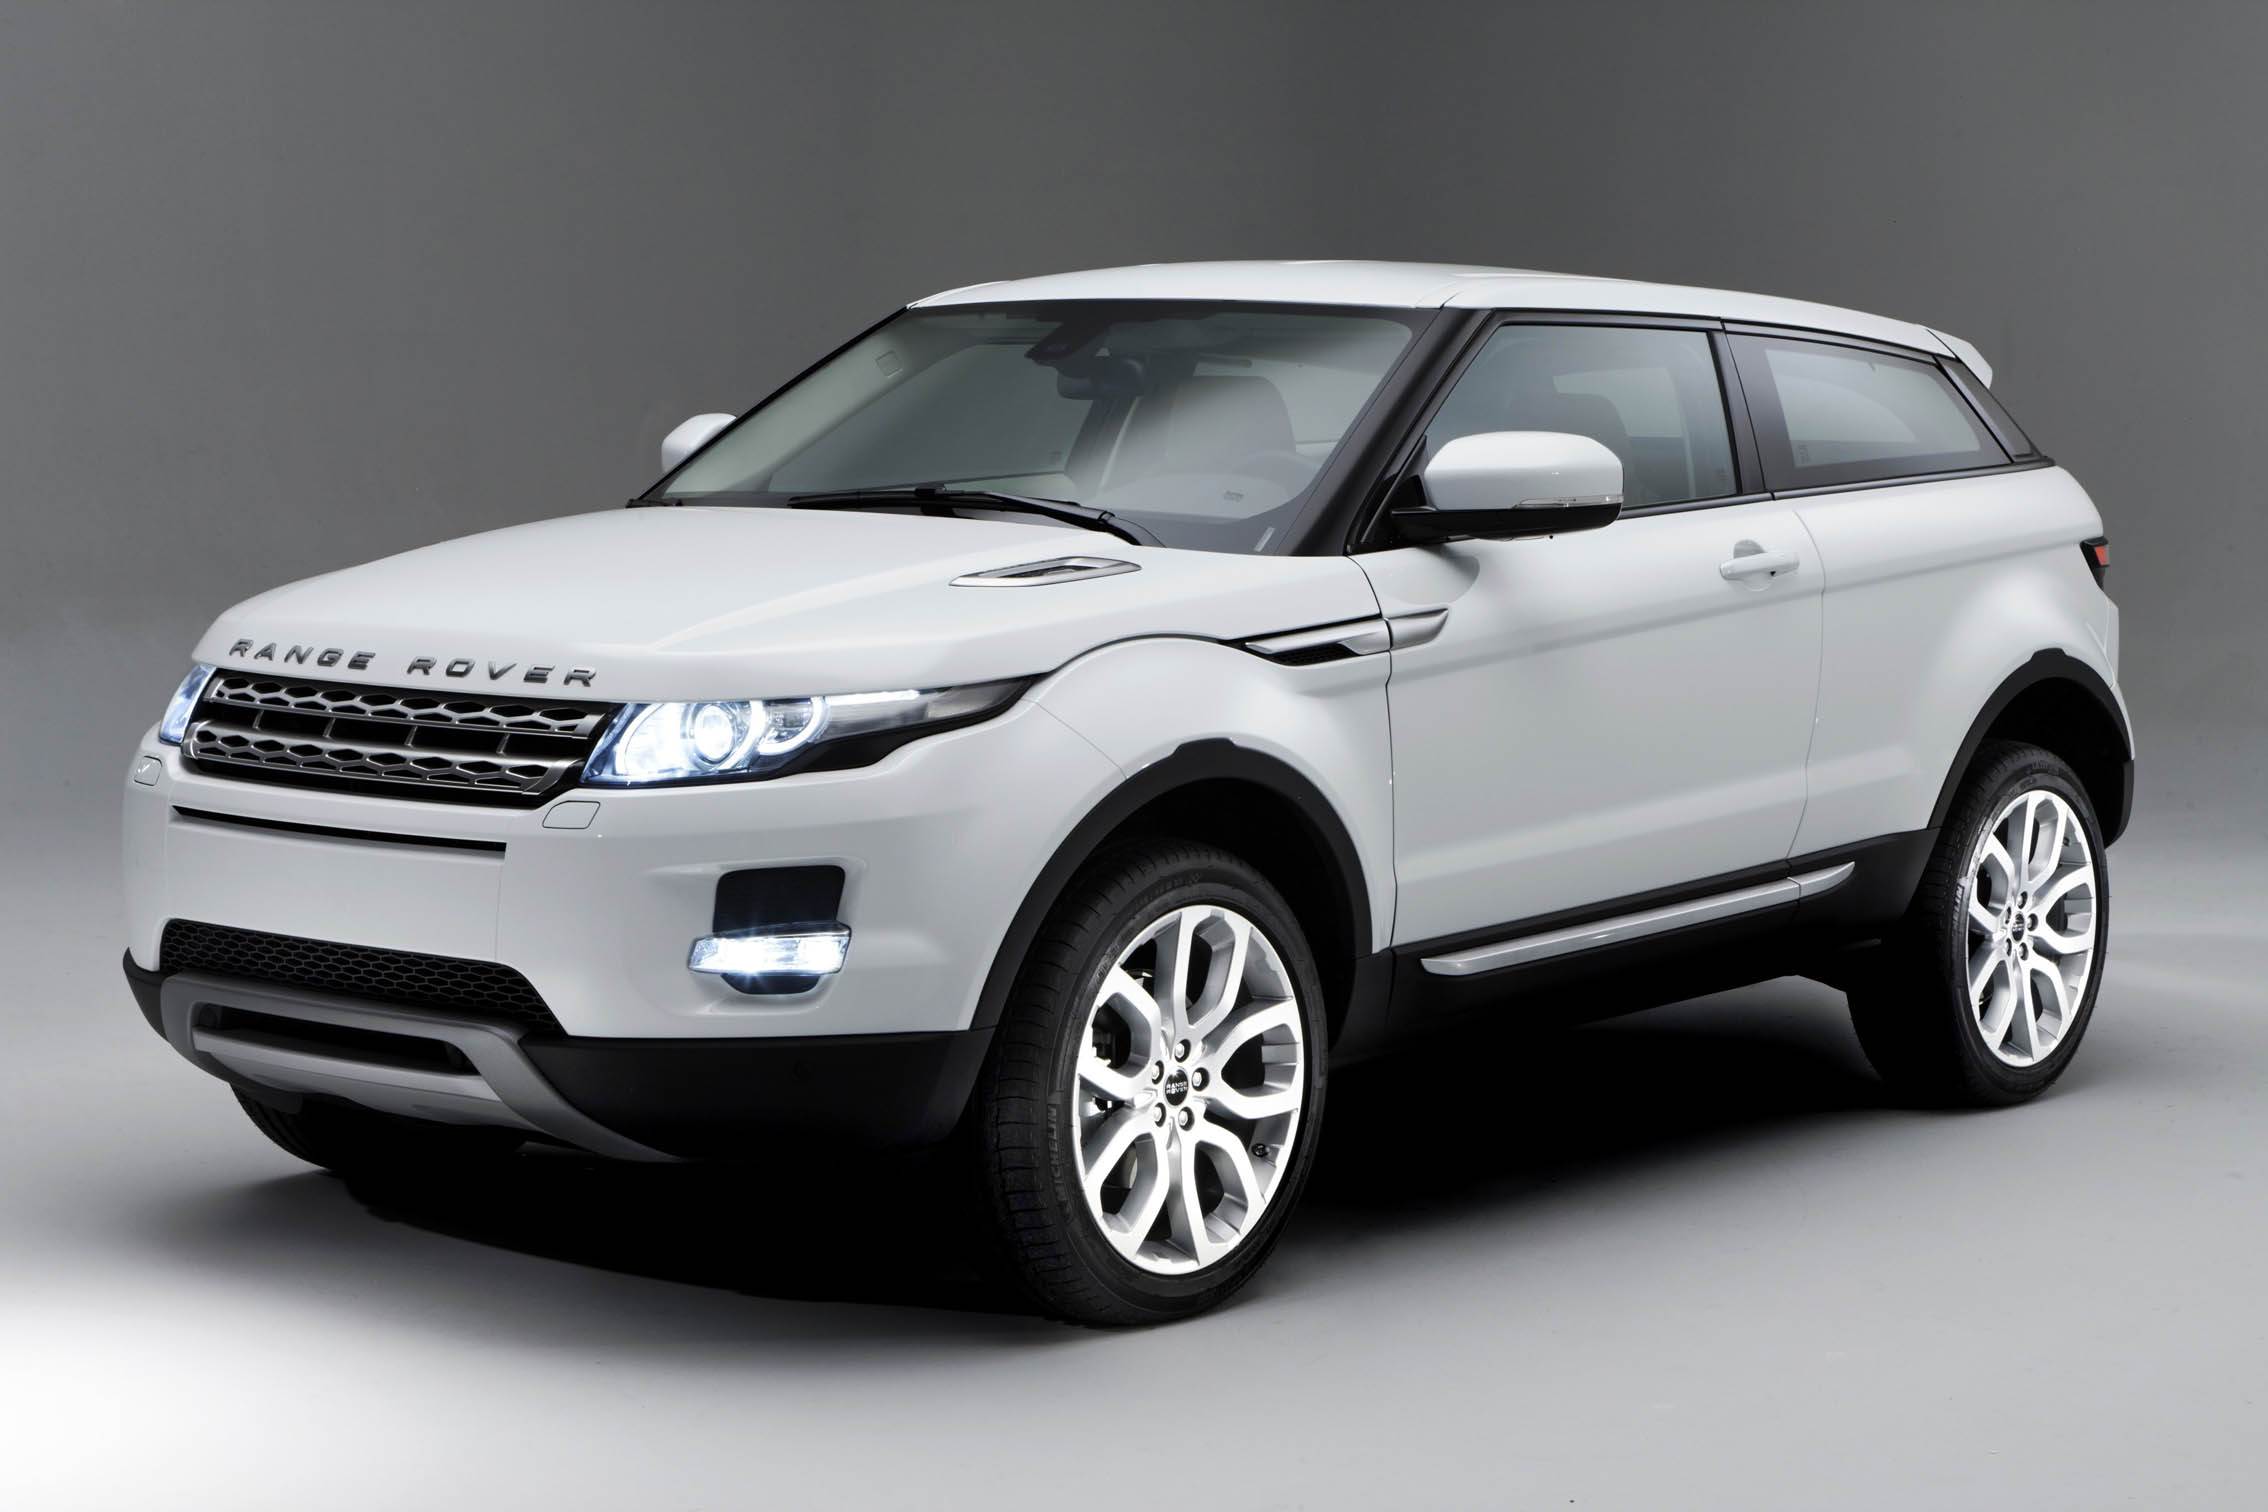 Built-in-India Range Rover Evoque to cost Rs 48.73 lakh